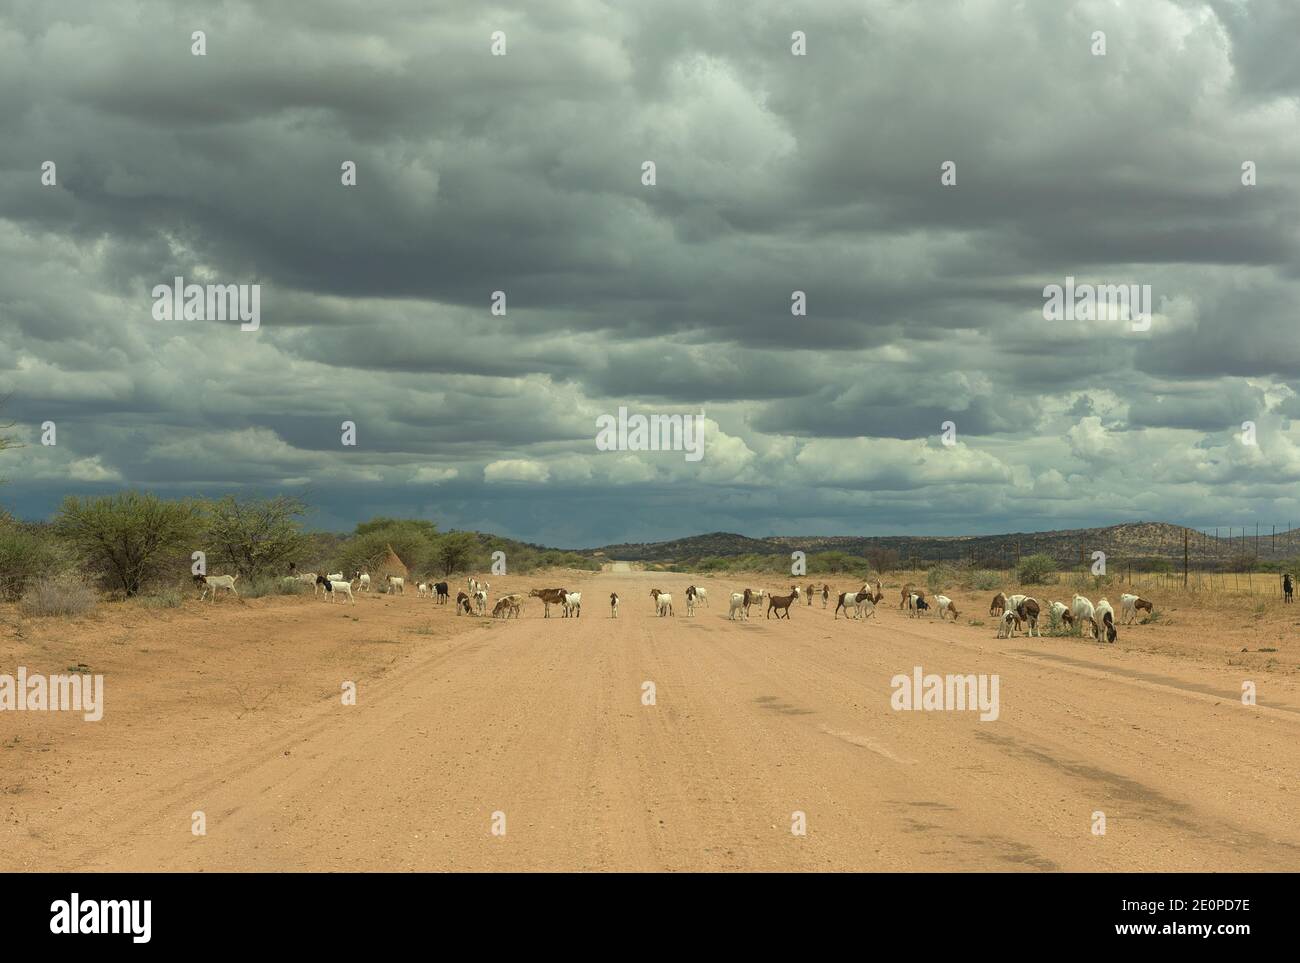 A herd of goats crossing the dirt road, Namibia Stock Photo